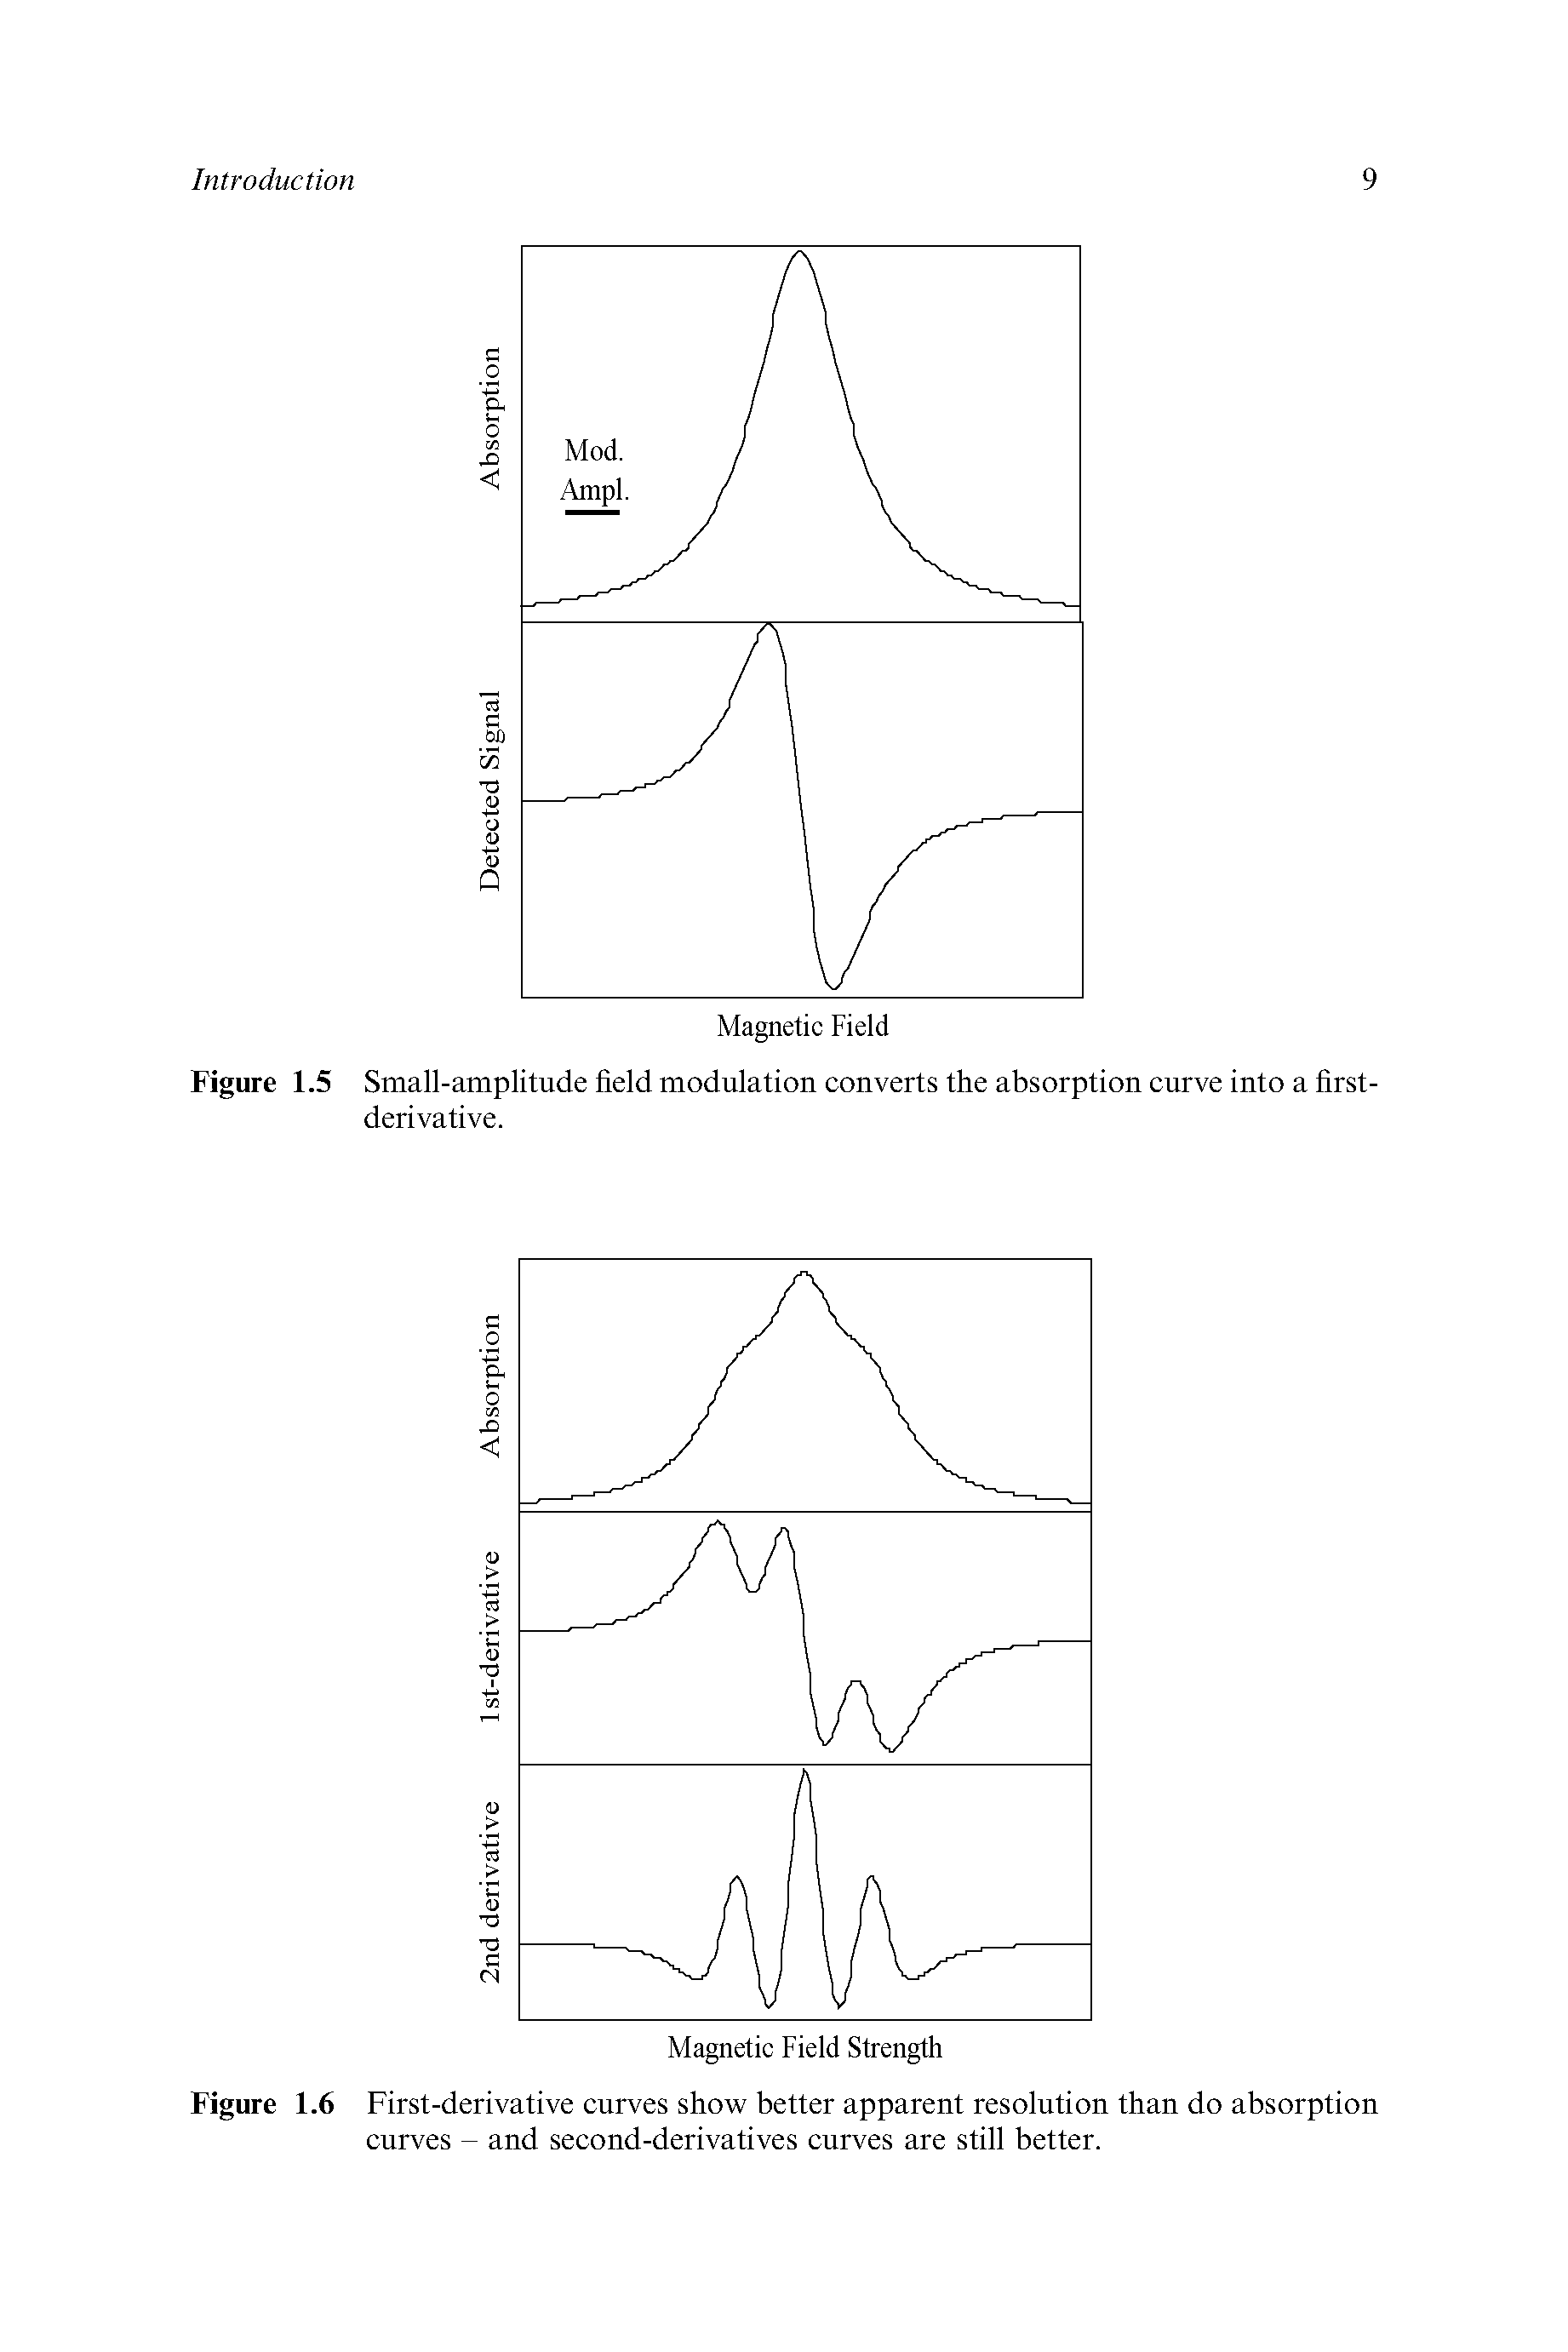 Figure 1.6 First-derivative curves show better apparent resolution than do absorption curves - and second-derivatives curves are still better.